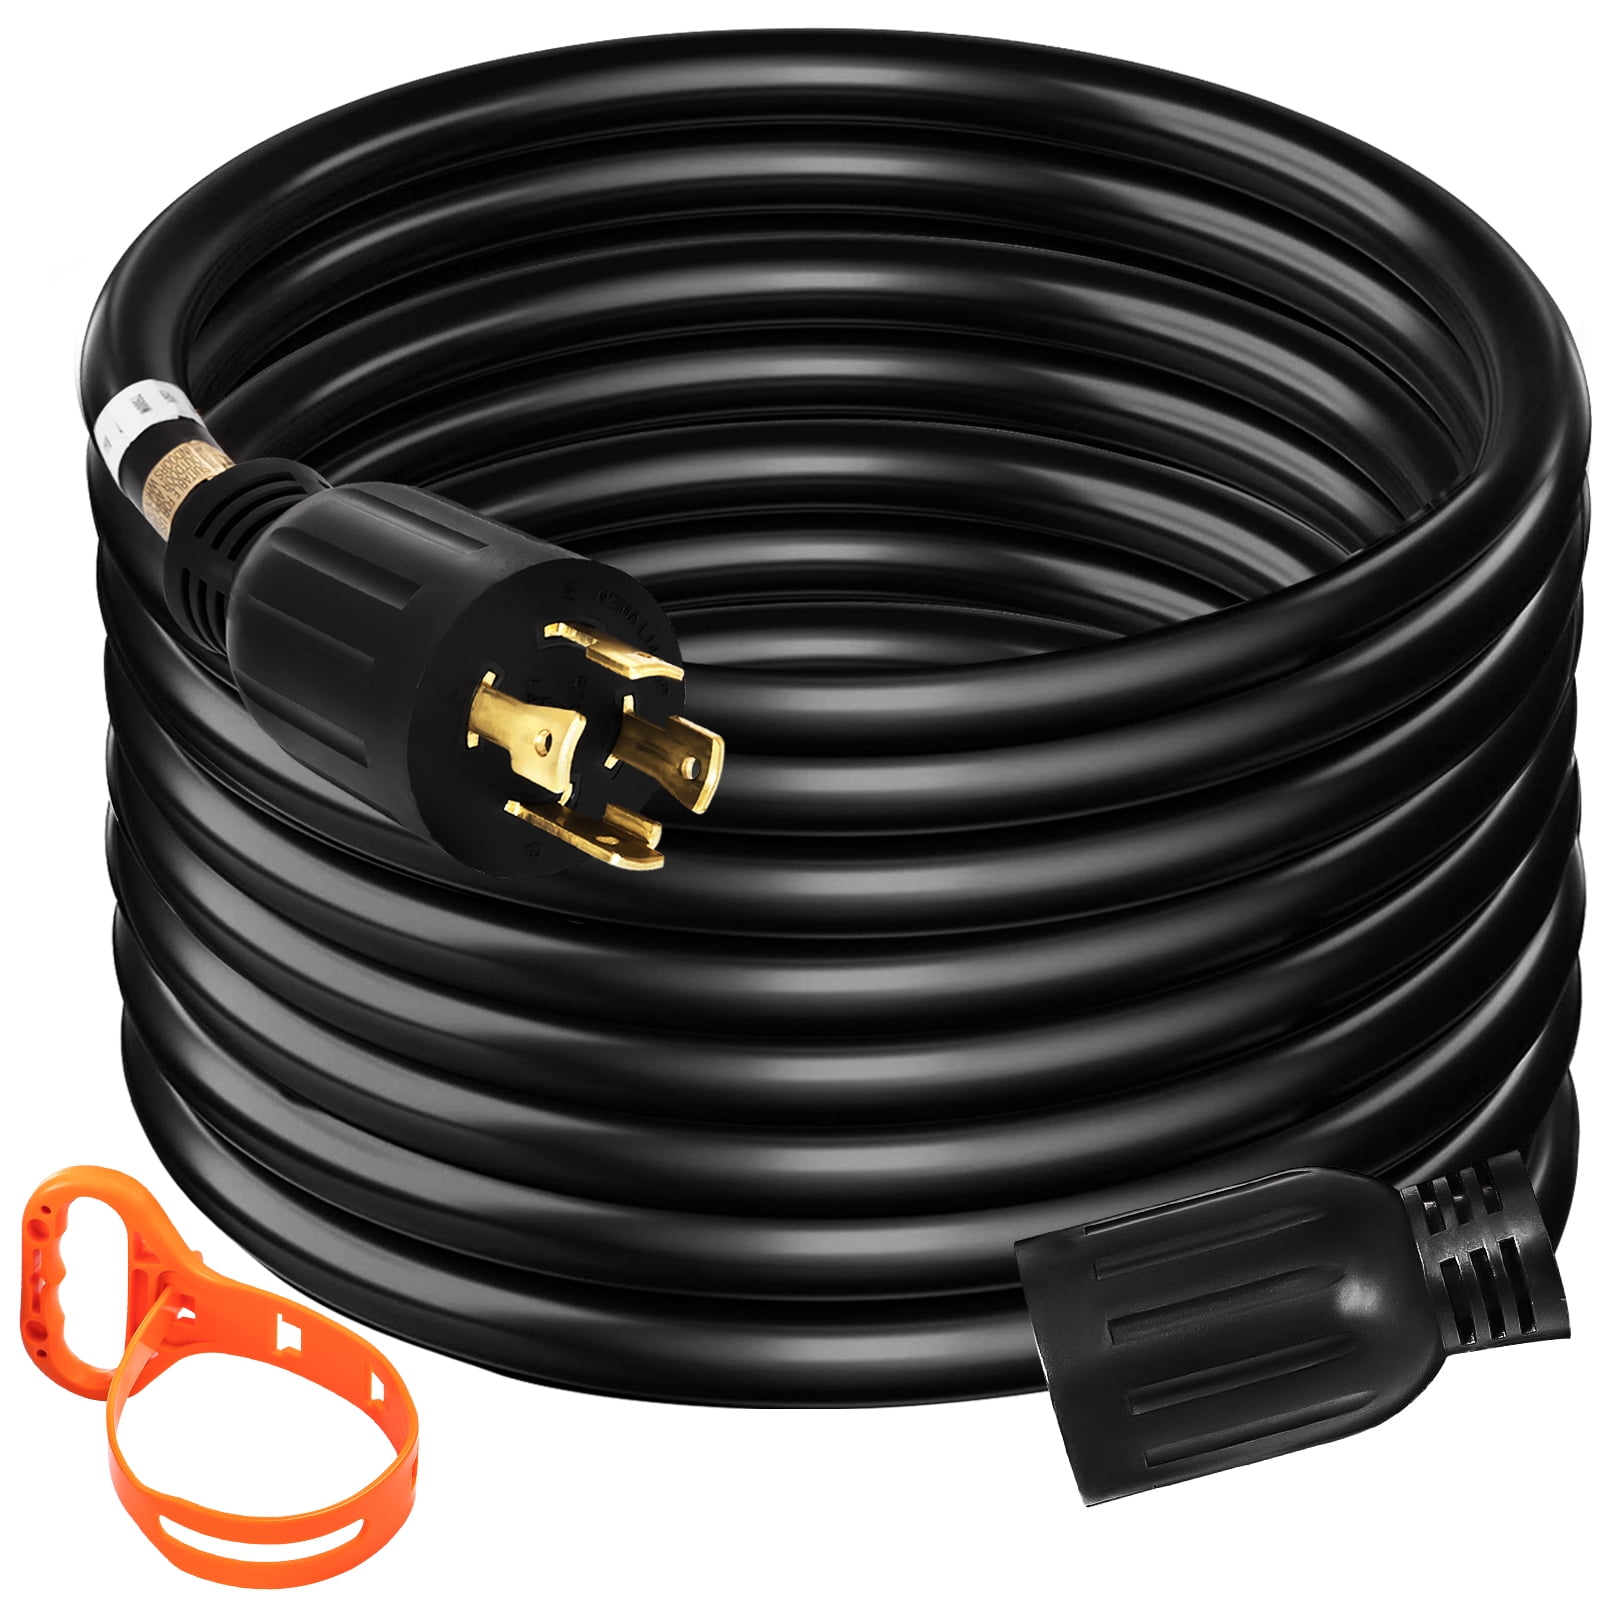 VEVOR 20 ft 30 Amp Generator Extension Cord 4 Wire 10 Gauge 125V 250V UL & Cul Listed Generator Power Cord Twist Lock Connectors, Size: 20